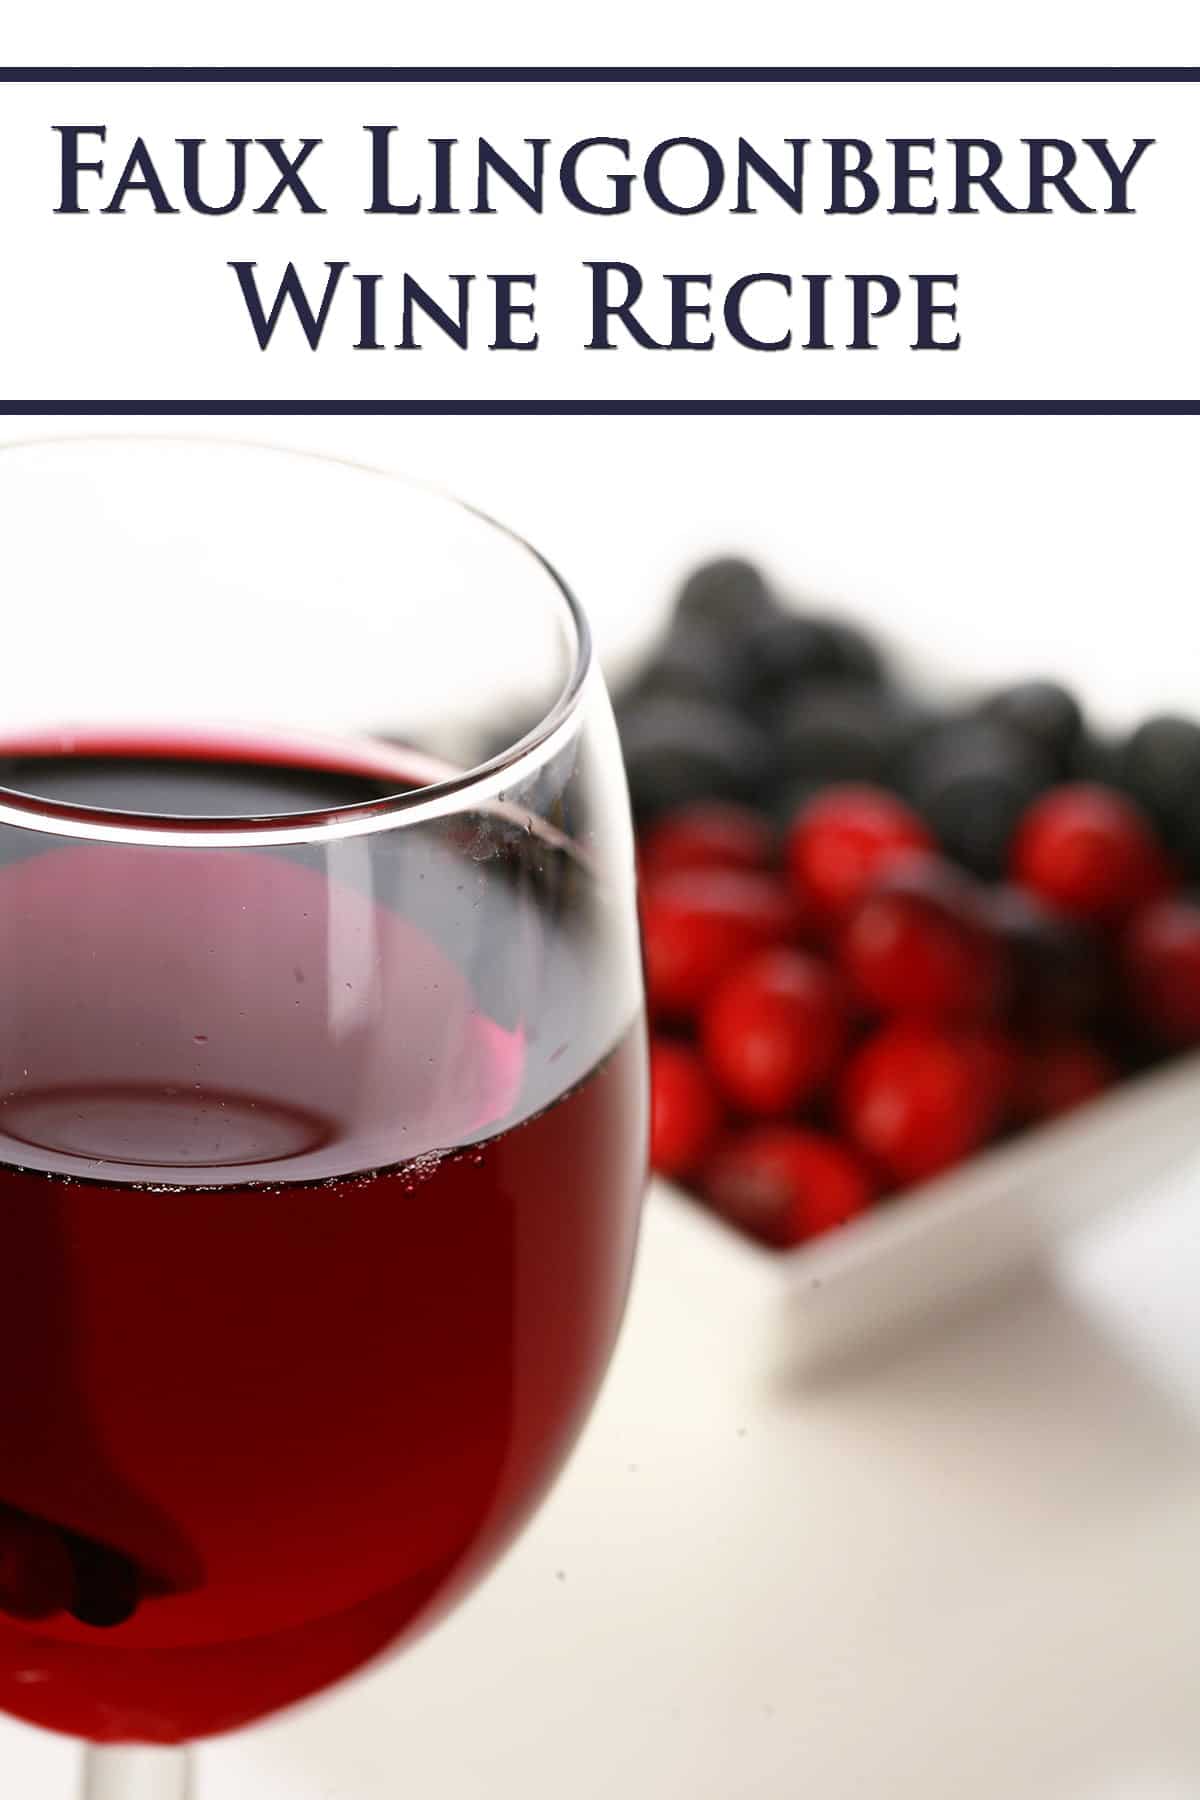 A glass of red wine - made from this faux lingonberry wine recipe - is pictured next to a small bowl of cranberries and blueberries